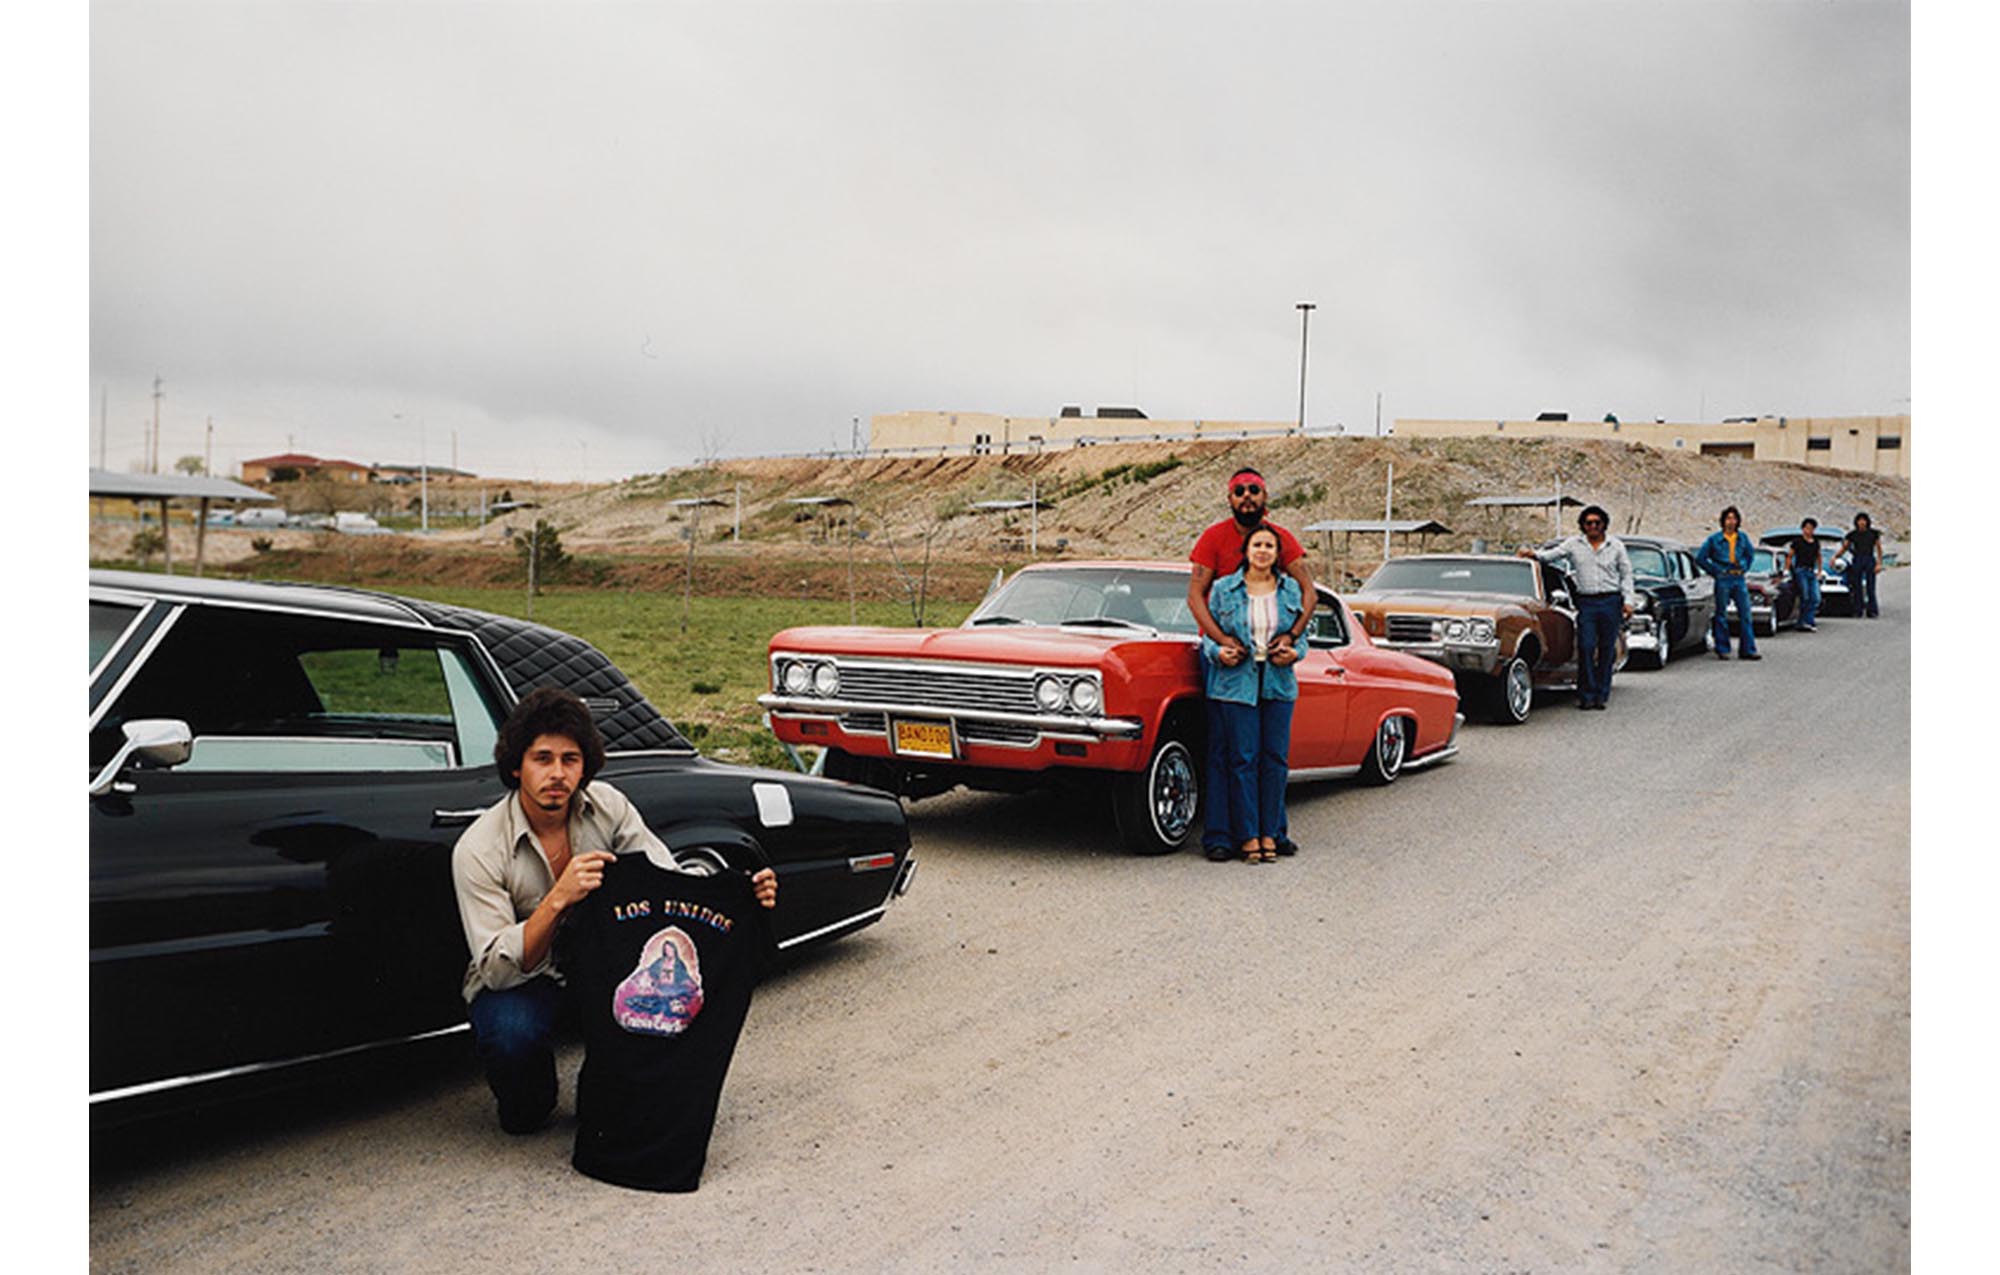 desert road, large low building in background, row of cars parked by the side of a dirt road with their owners standing near them, the owner of the first car in line squatting down and holding a black T-shirt with the Virgin and Los Unidos printed on it